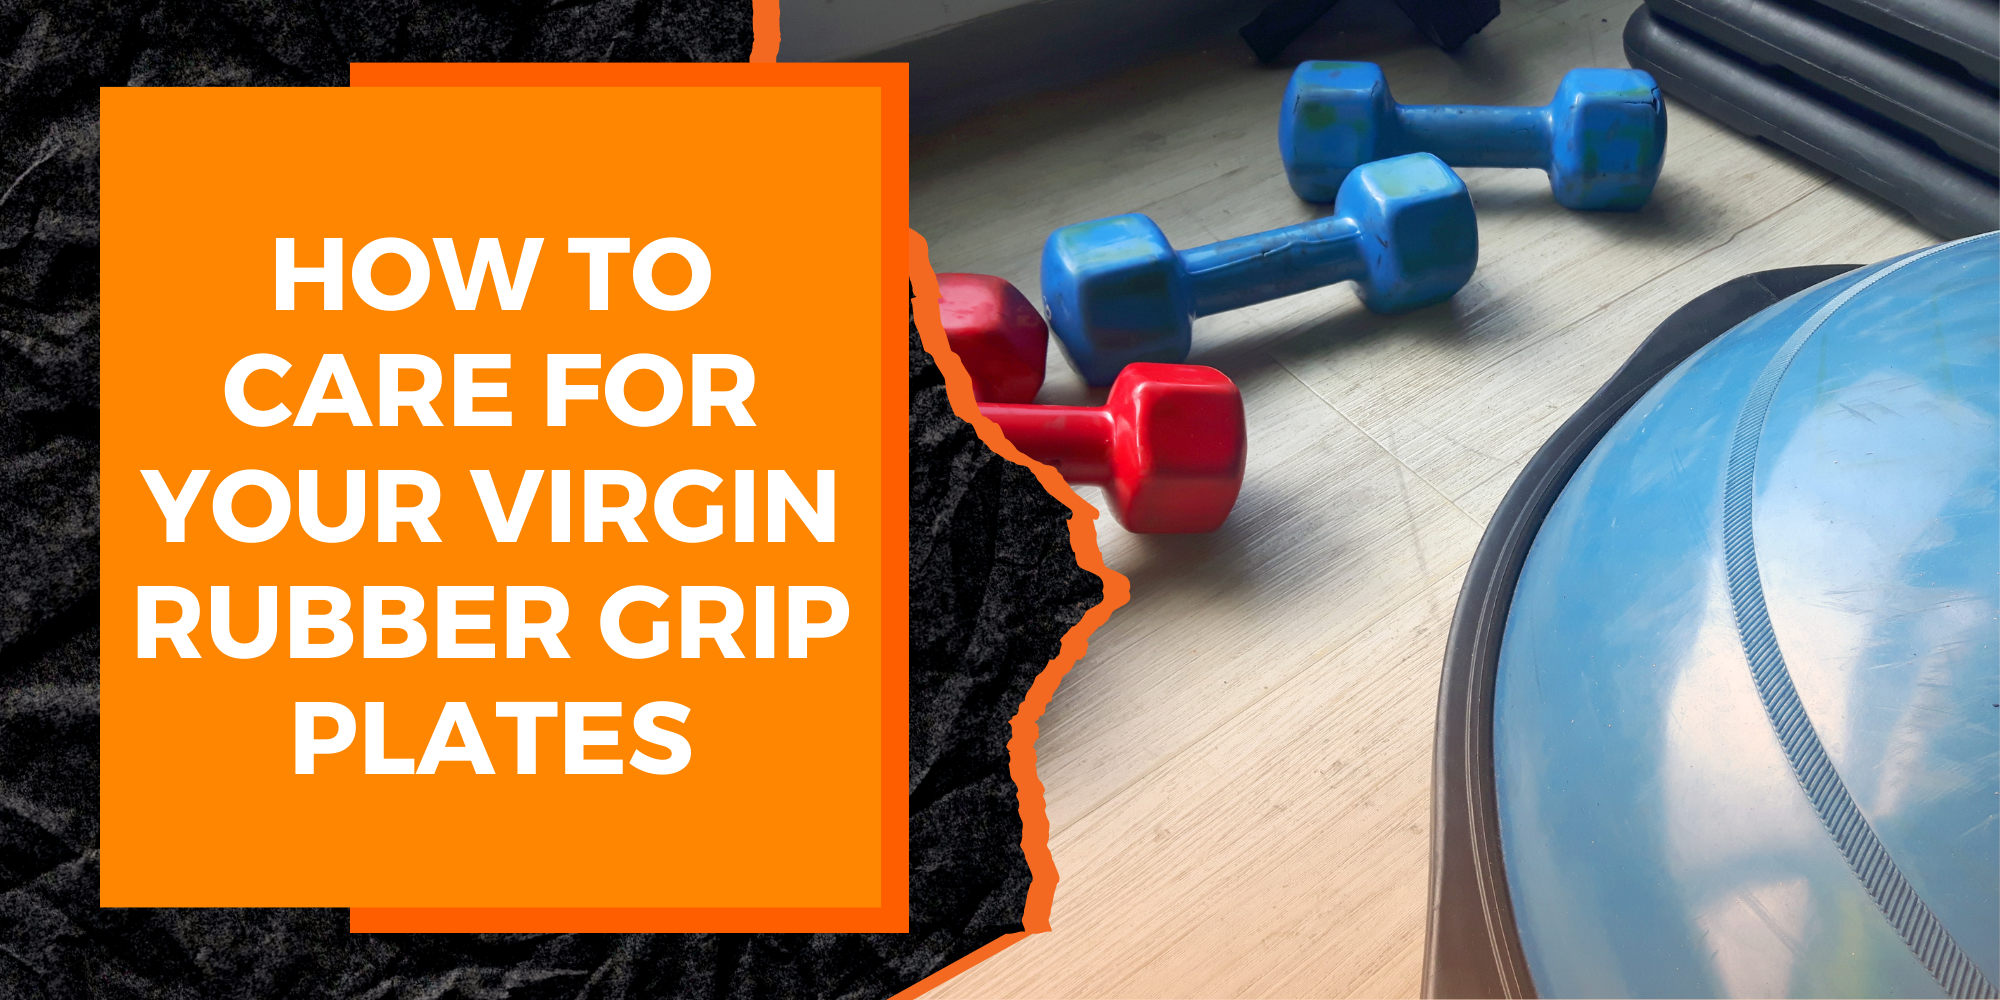 How to Care for Your Virgin Rubber Grip Plates